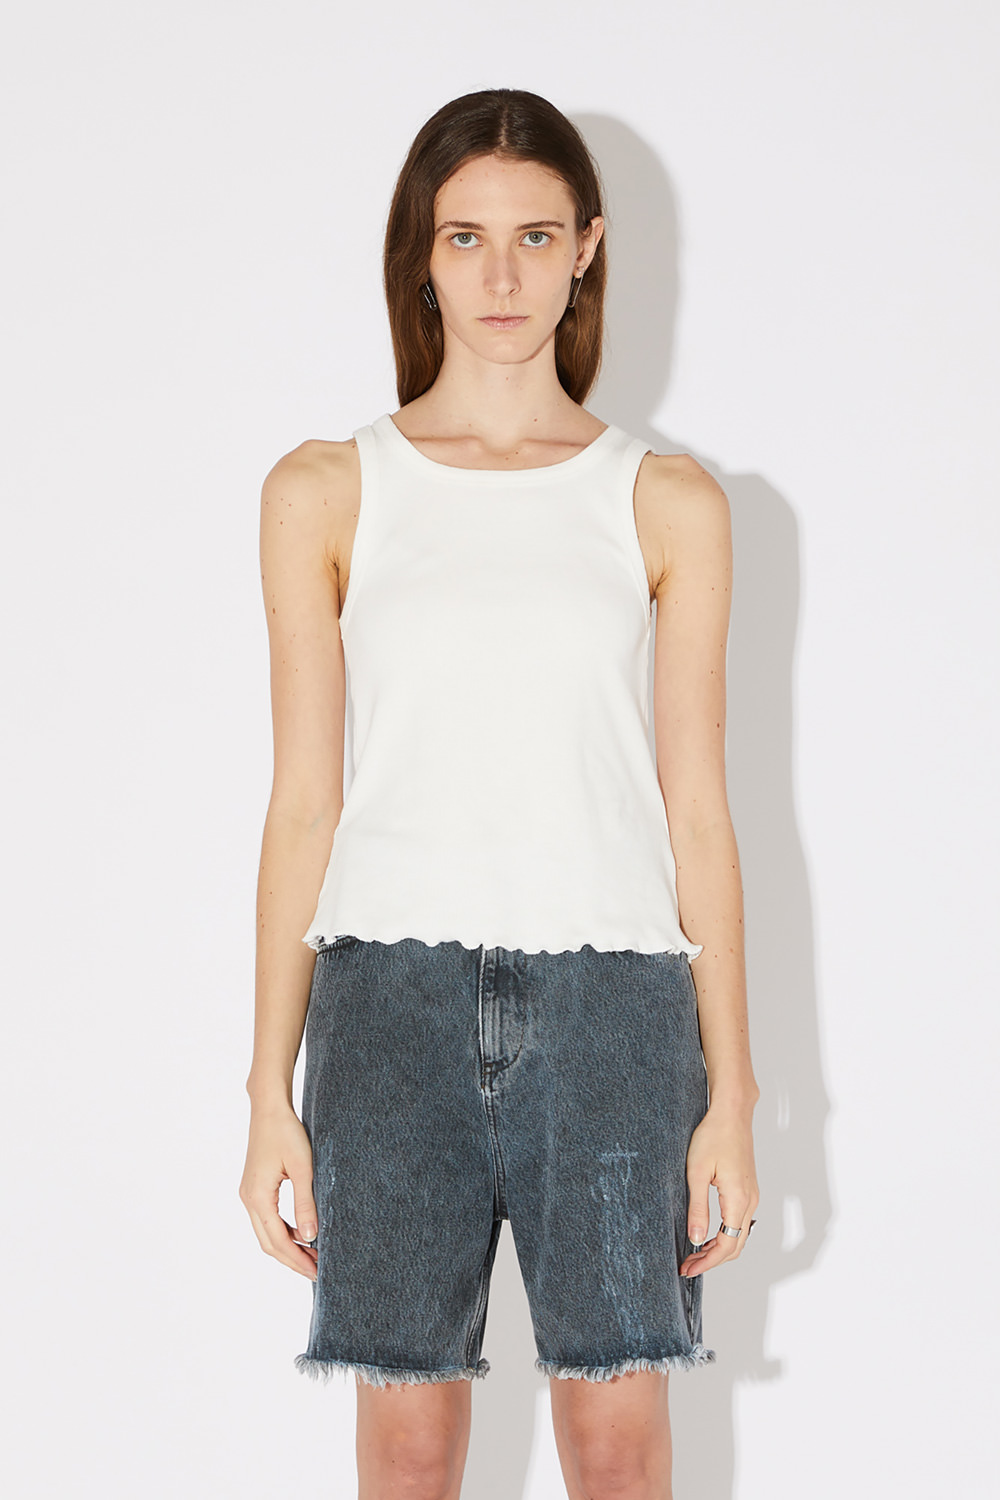 AMISH: TANK TOP IN COTTON